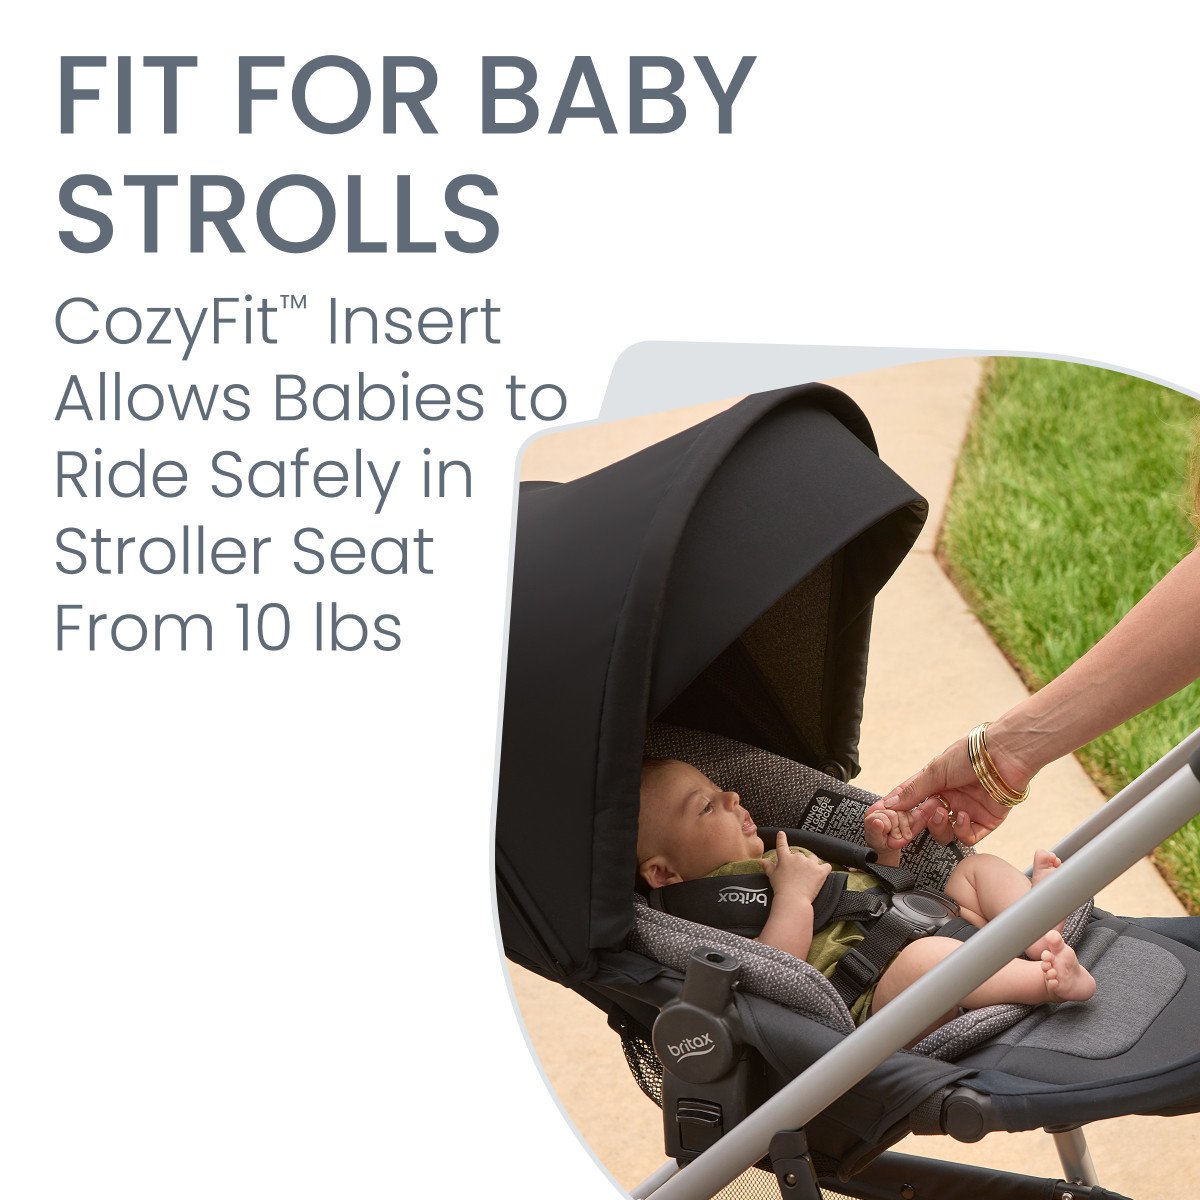 Fit for baby strolls (Copy)